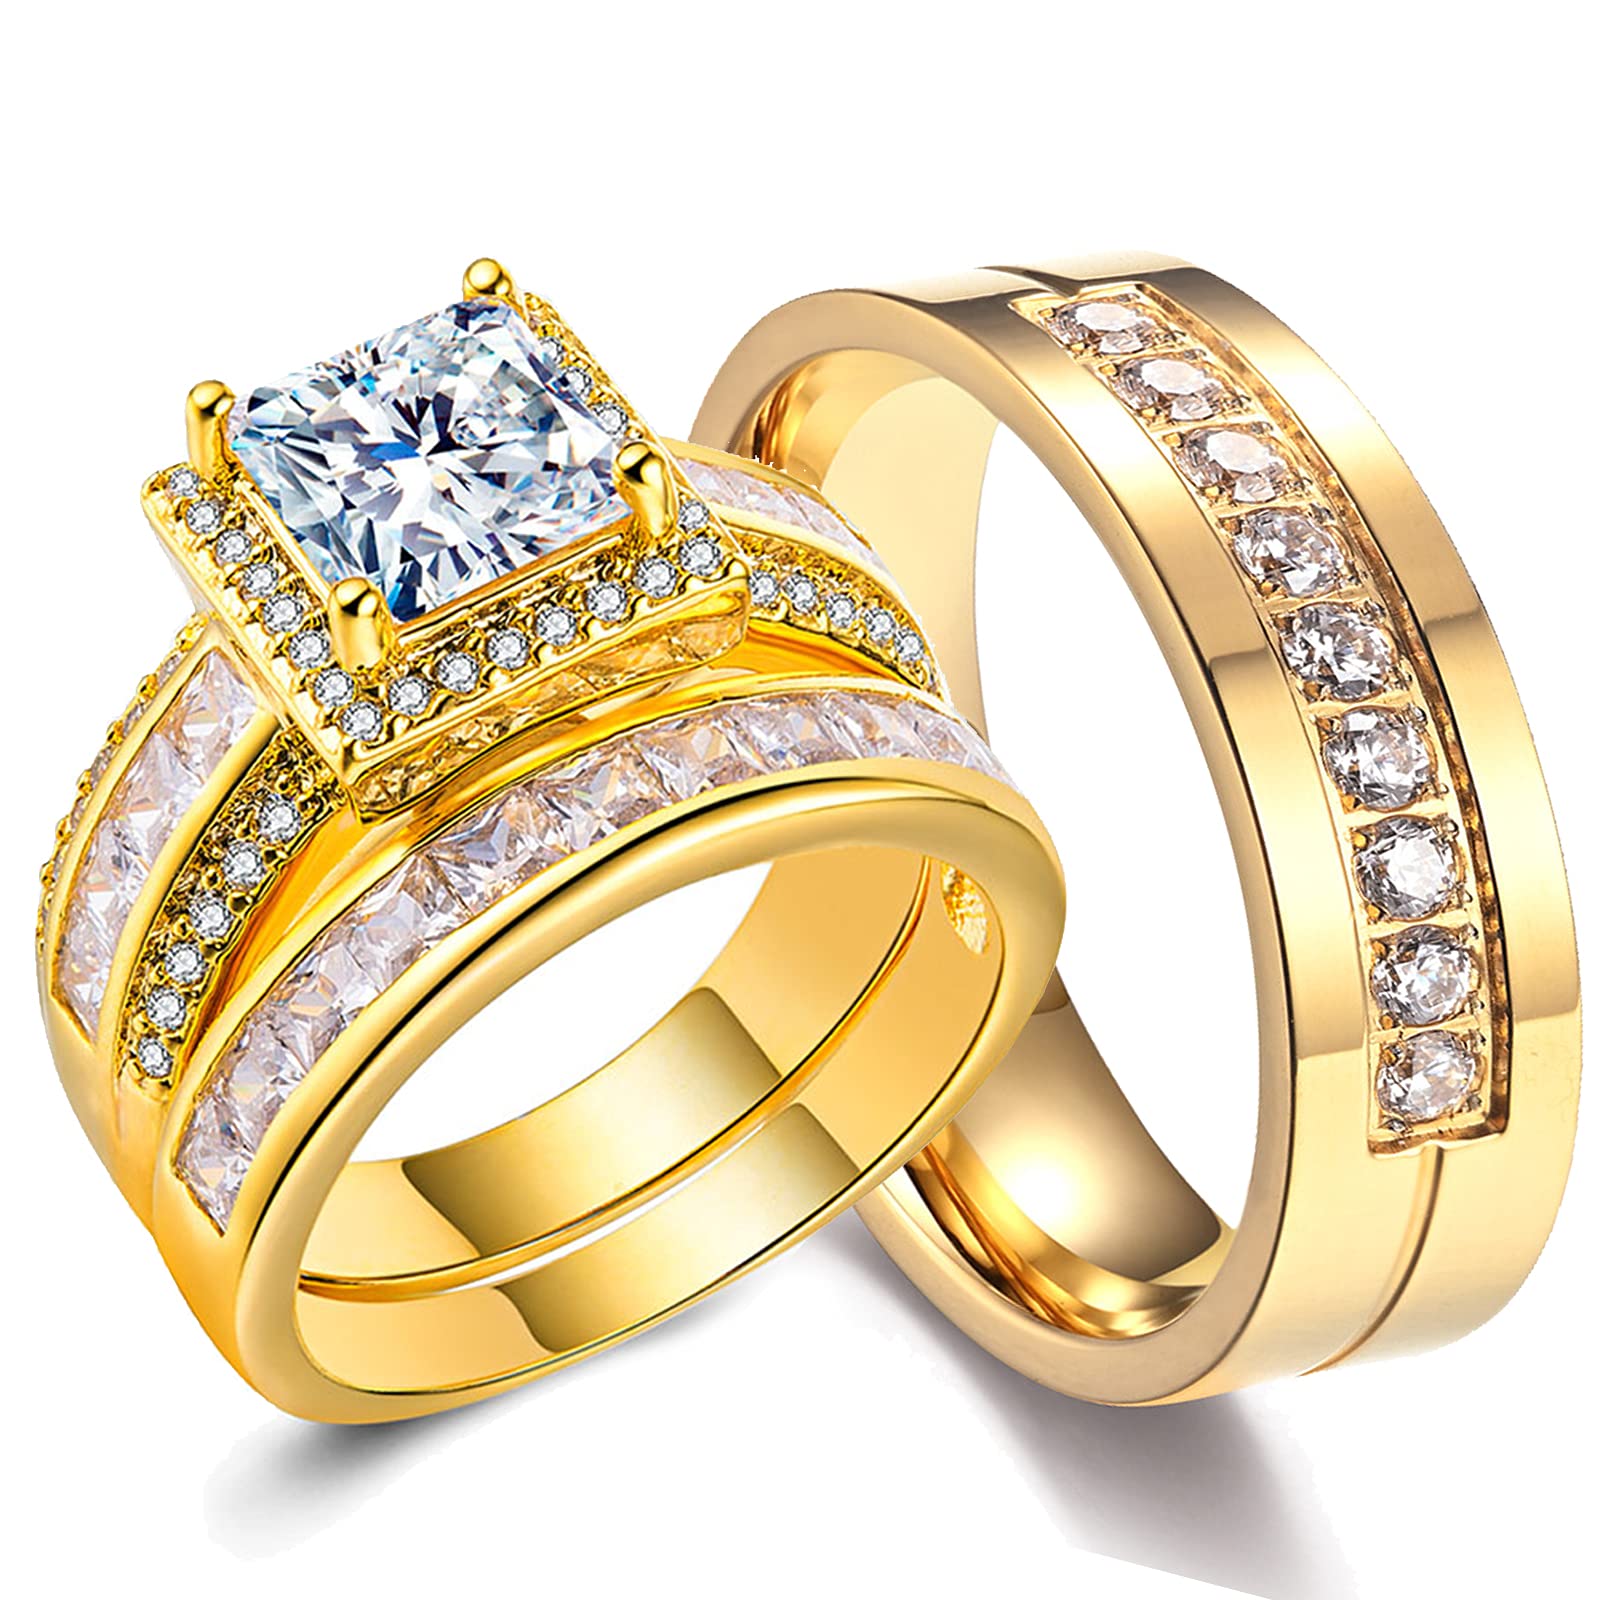 CEJUG 18k Yellow Gold Plated Wedding Ring Sets for Him and Her Women Men Titanium Stainless Steel Bands Couple Rings 3Ct Cz